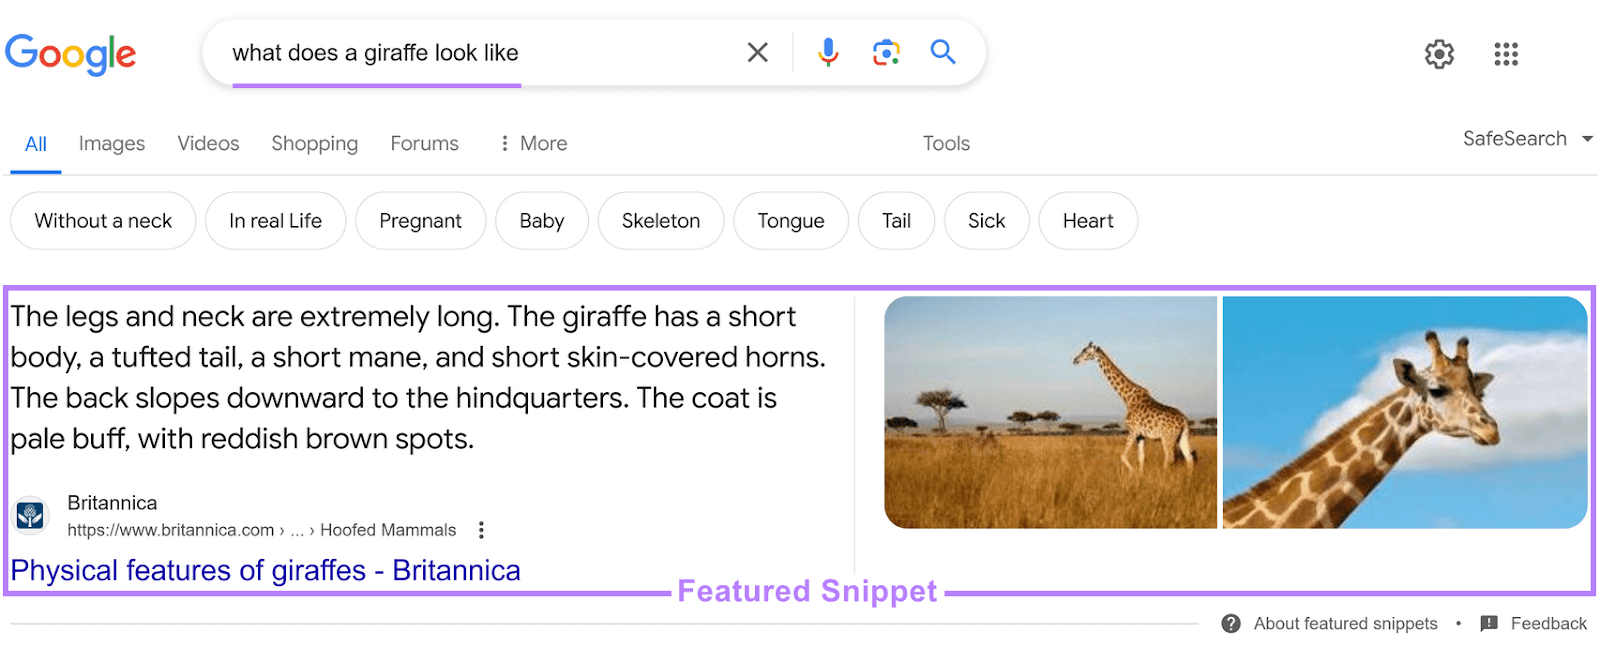 Google SERP for "what does a giraffe look like," showing a featured snippet with a short paragraph, link, title, and images.